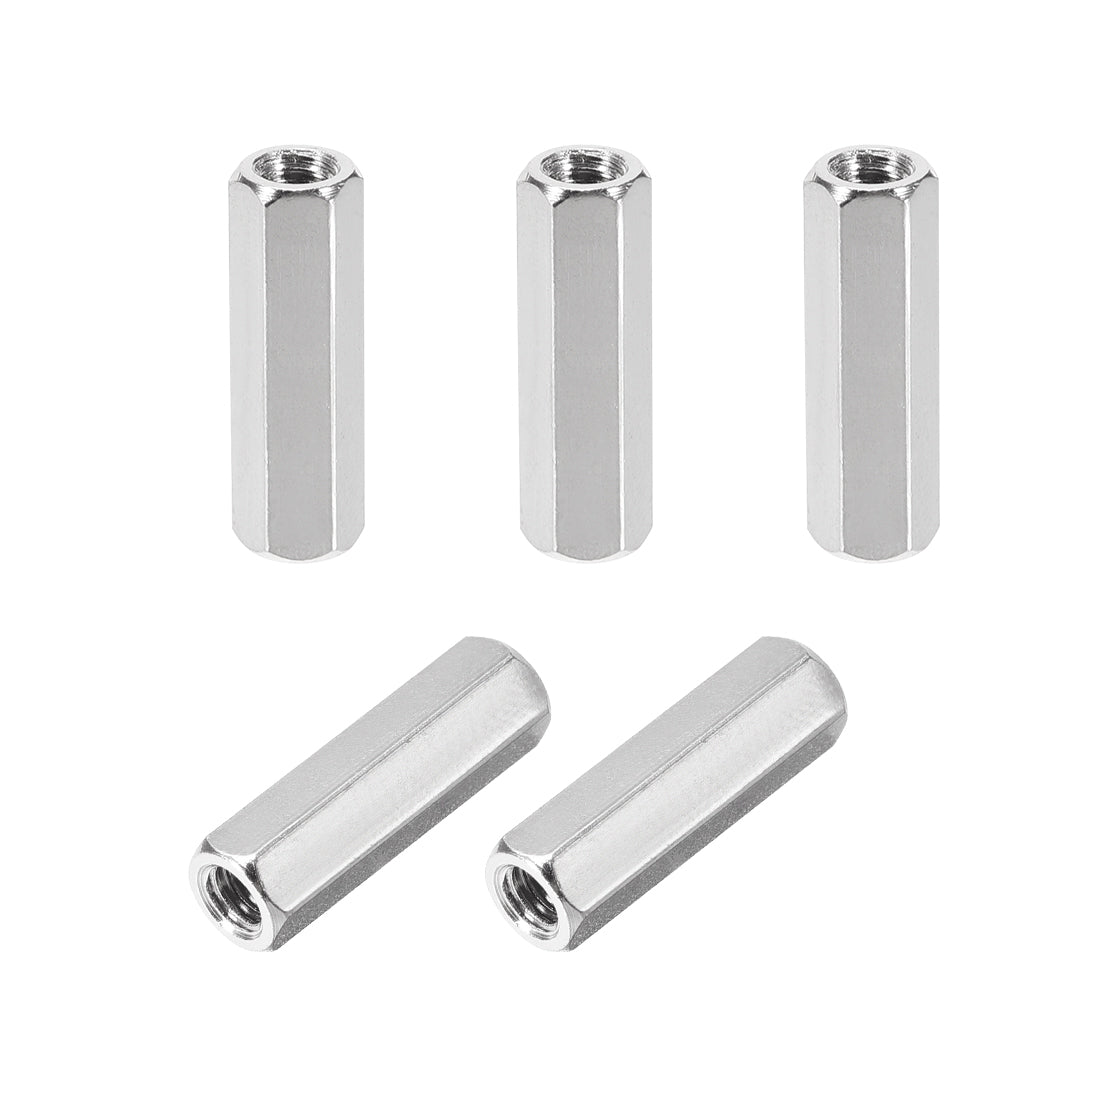 Uxcell Uxcell M4 x 25mm Female to Female Hex Nickel Plated Spacer Standoff 5pcs